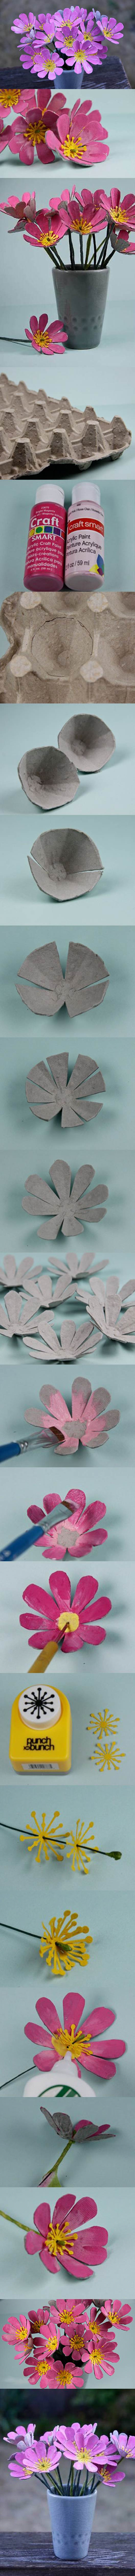 Butterfly Flowers from egg carton M Wonderful DIY Butterfly Flowers From Egg Carton